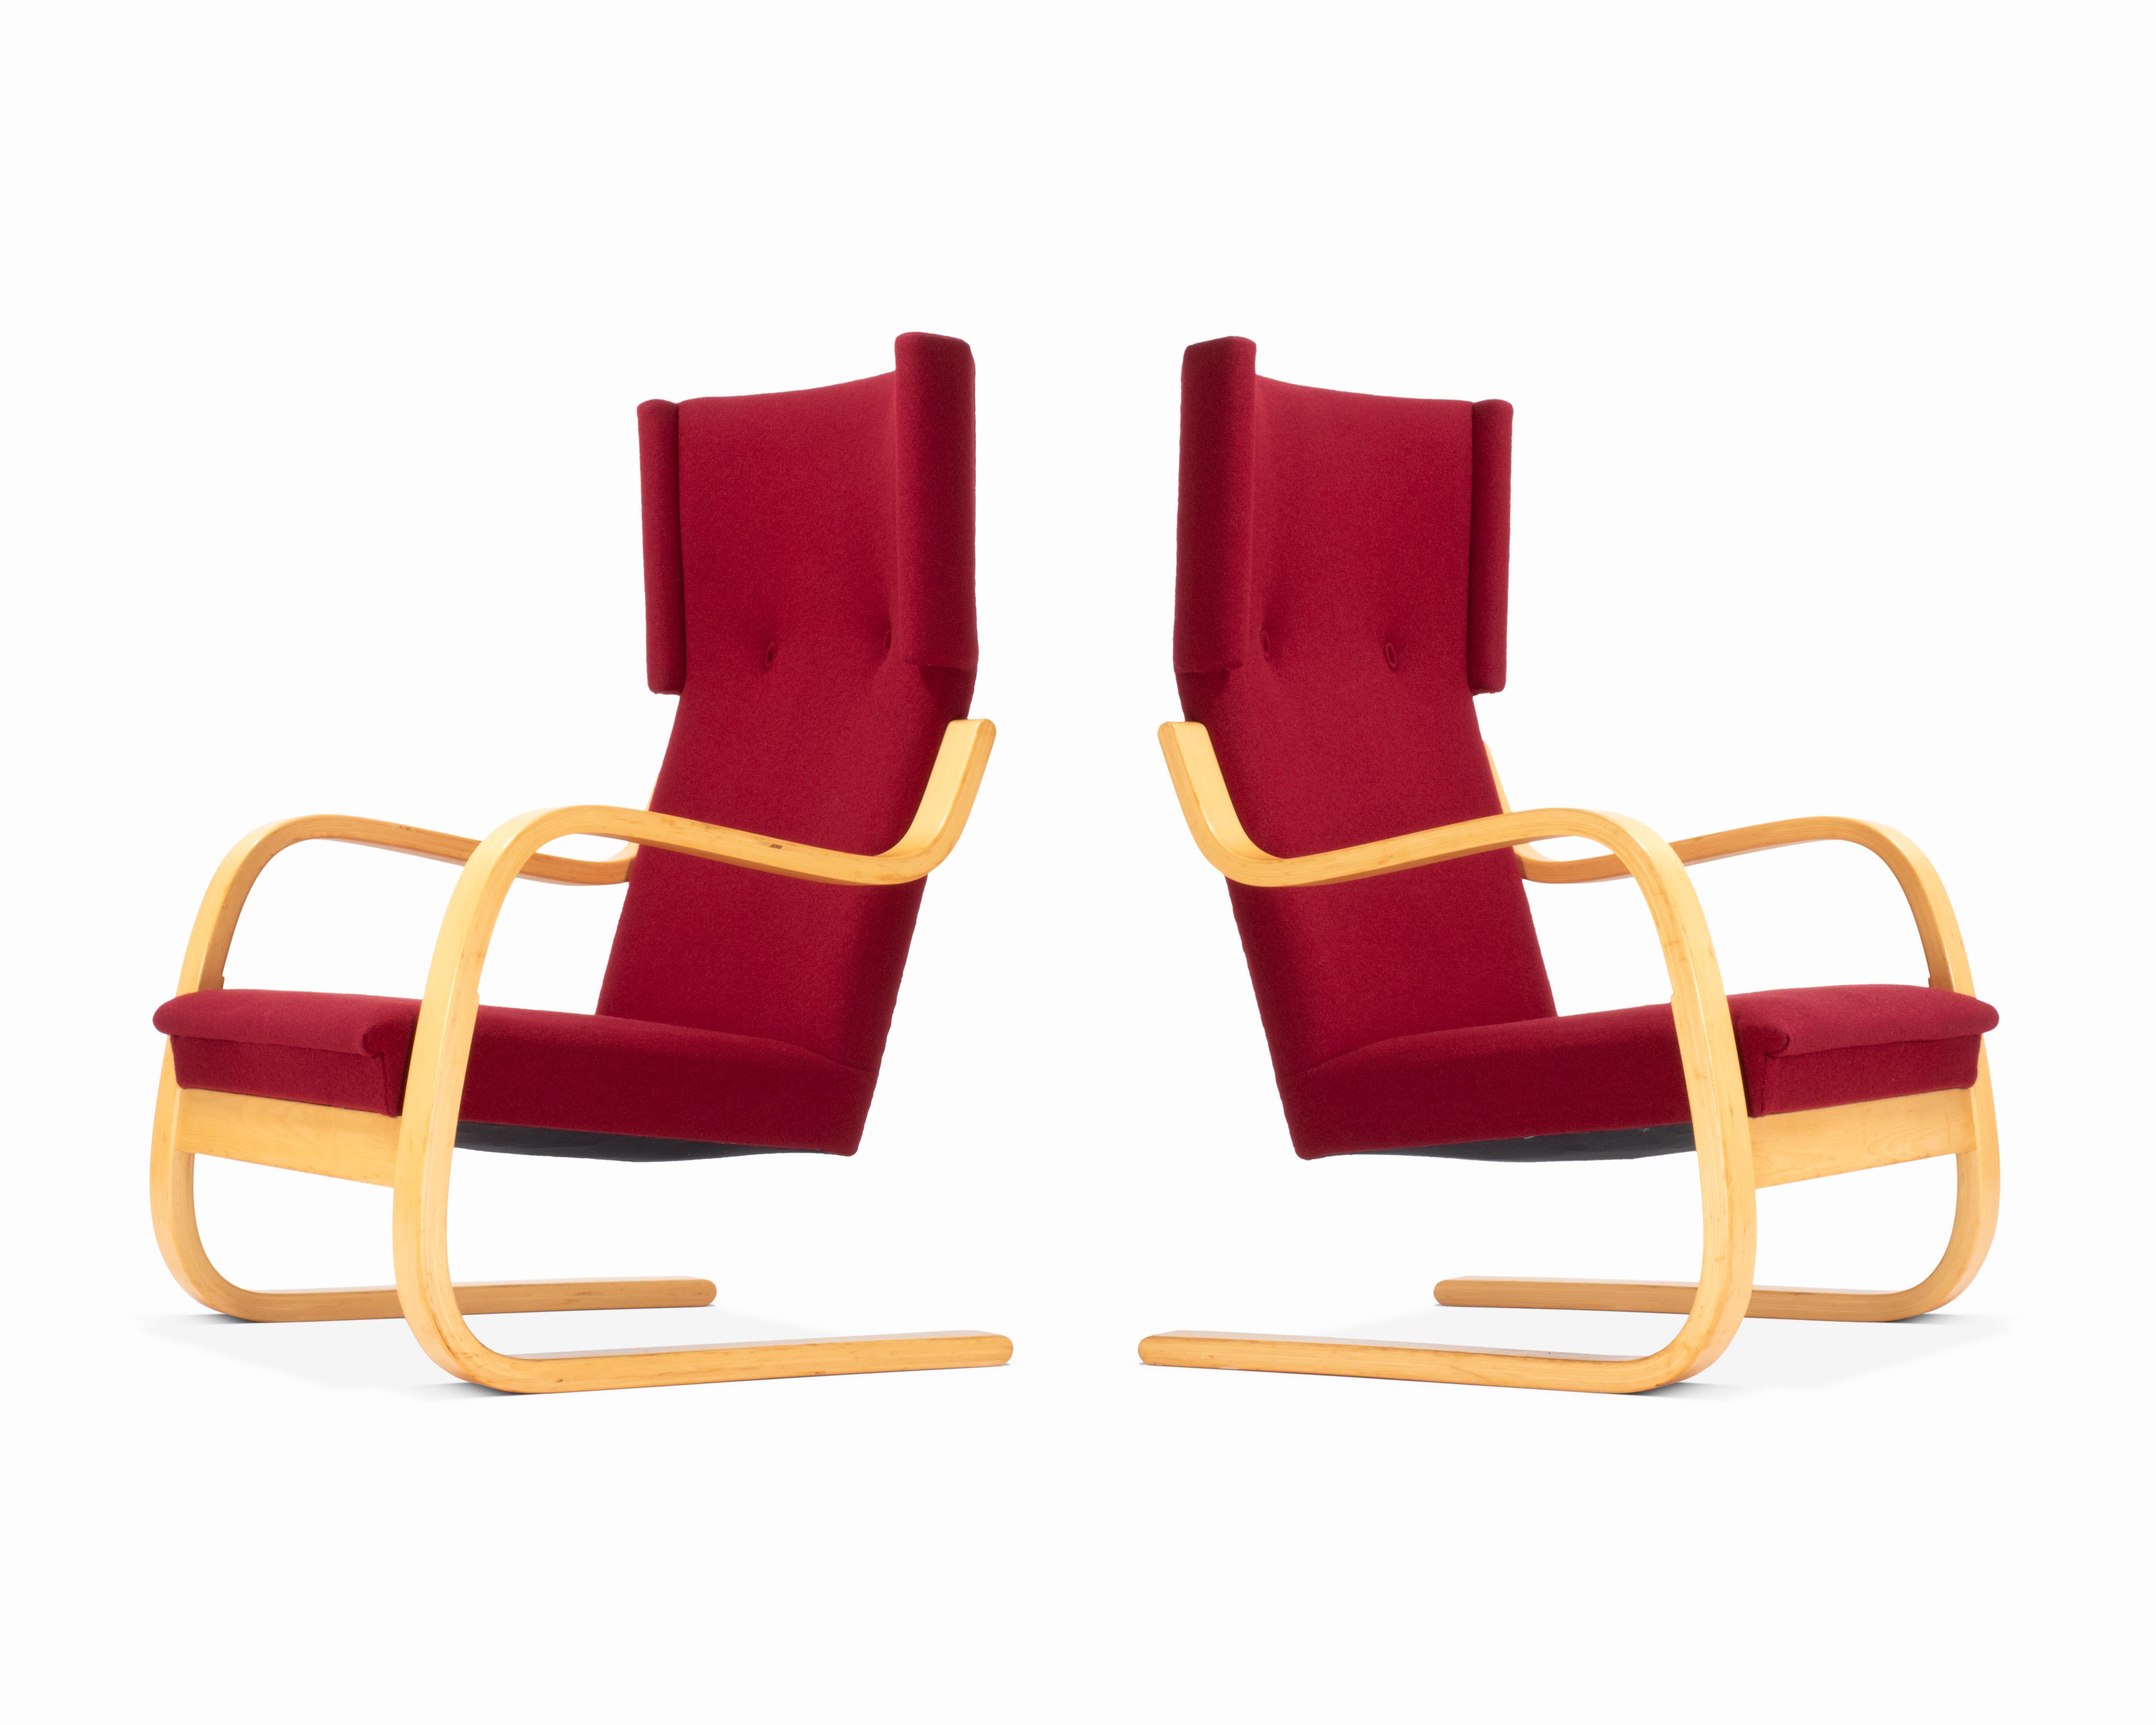 Here is a stunning pair of Alvar Aalto's Model 36/401. The wingback, cantilever design was first introduced in 1933 by Aalto following the popularity of his previous model chair. Some of the stunning details include matching/stamped armrests, spring